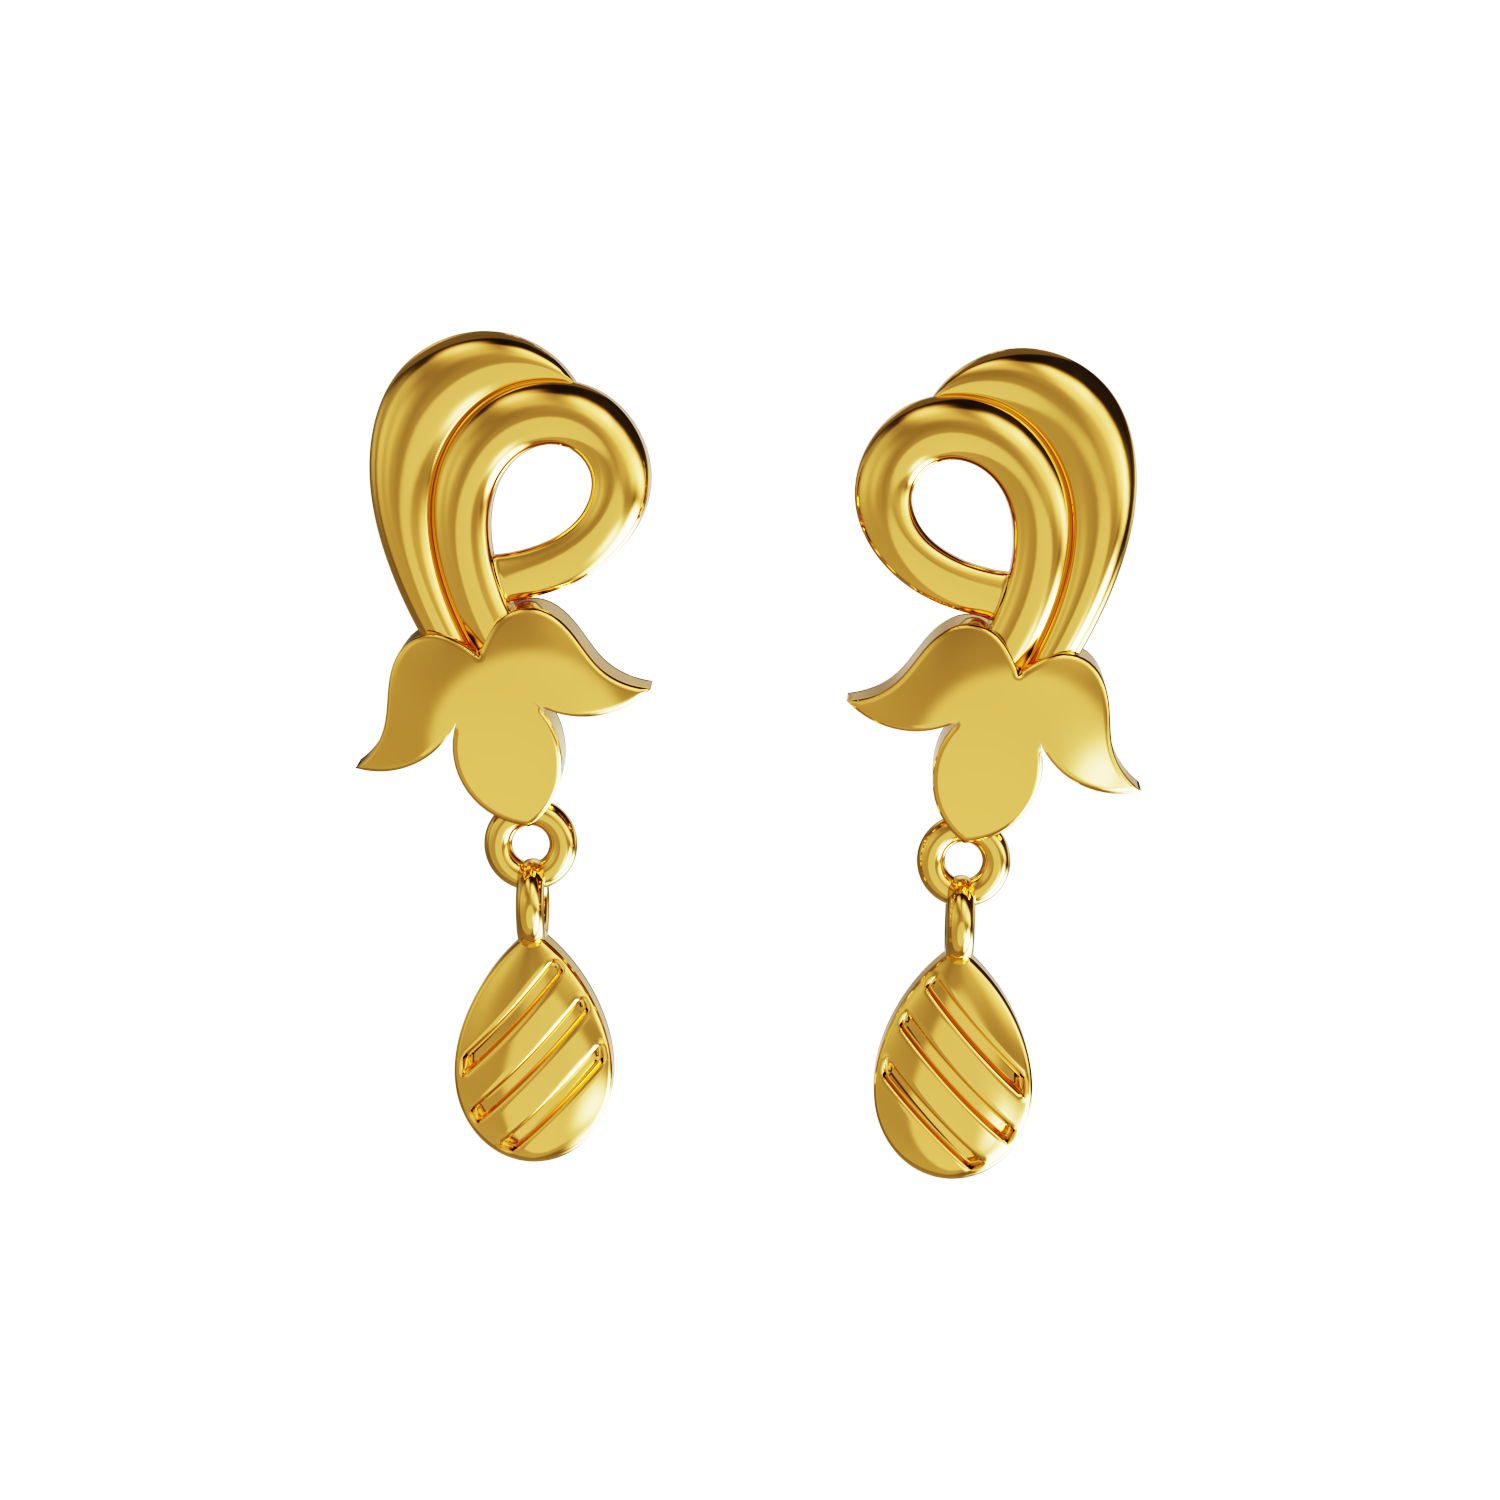 Pocket-Friendly Wholesale gold earrings designs babies For All Occasions -  Alibaba.com